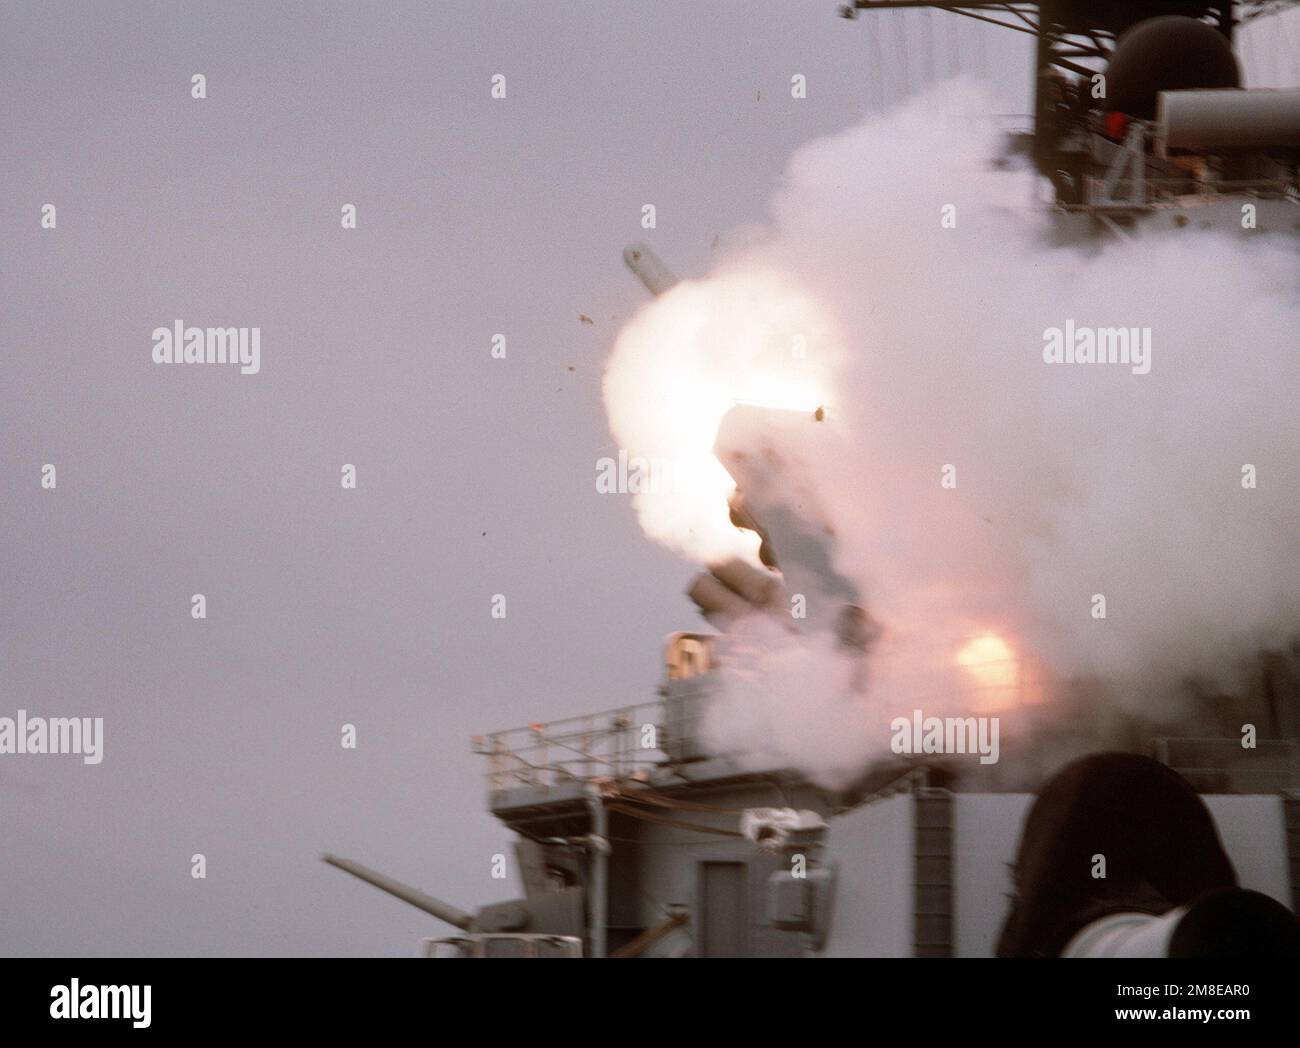 A BGM-109 Tomahawk land-attack missile (TLAN) is launched from a Mark 143 armored box launcher (ABL) aboard the battleship USS WISCONSIN (BB-64) during Operation Desert Storm. Subject Operation/Series: DESERT STORM Country: Persian Gulf Stock Photo